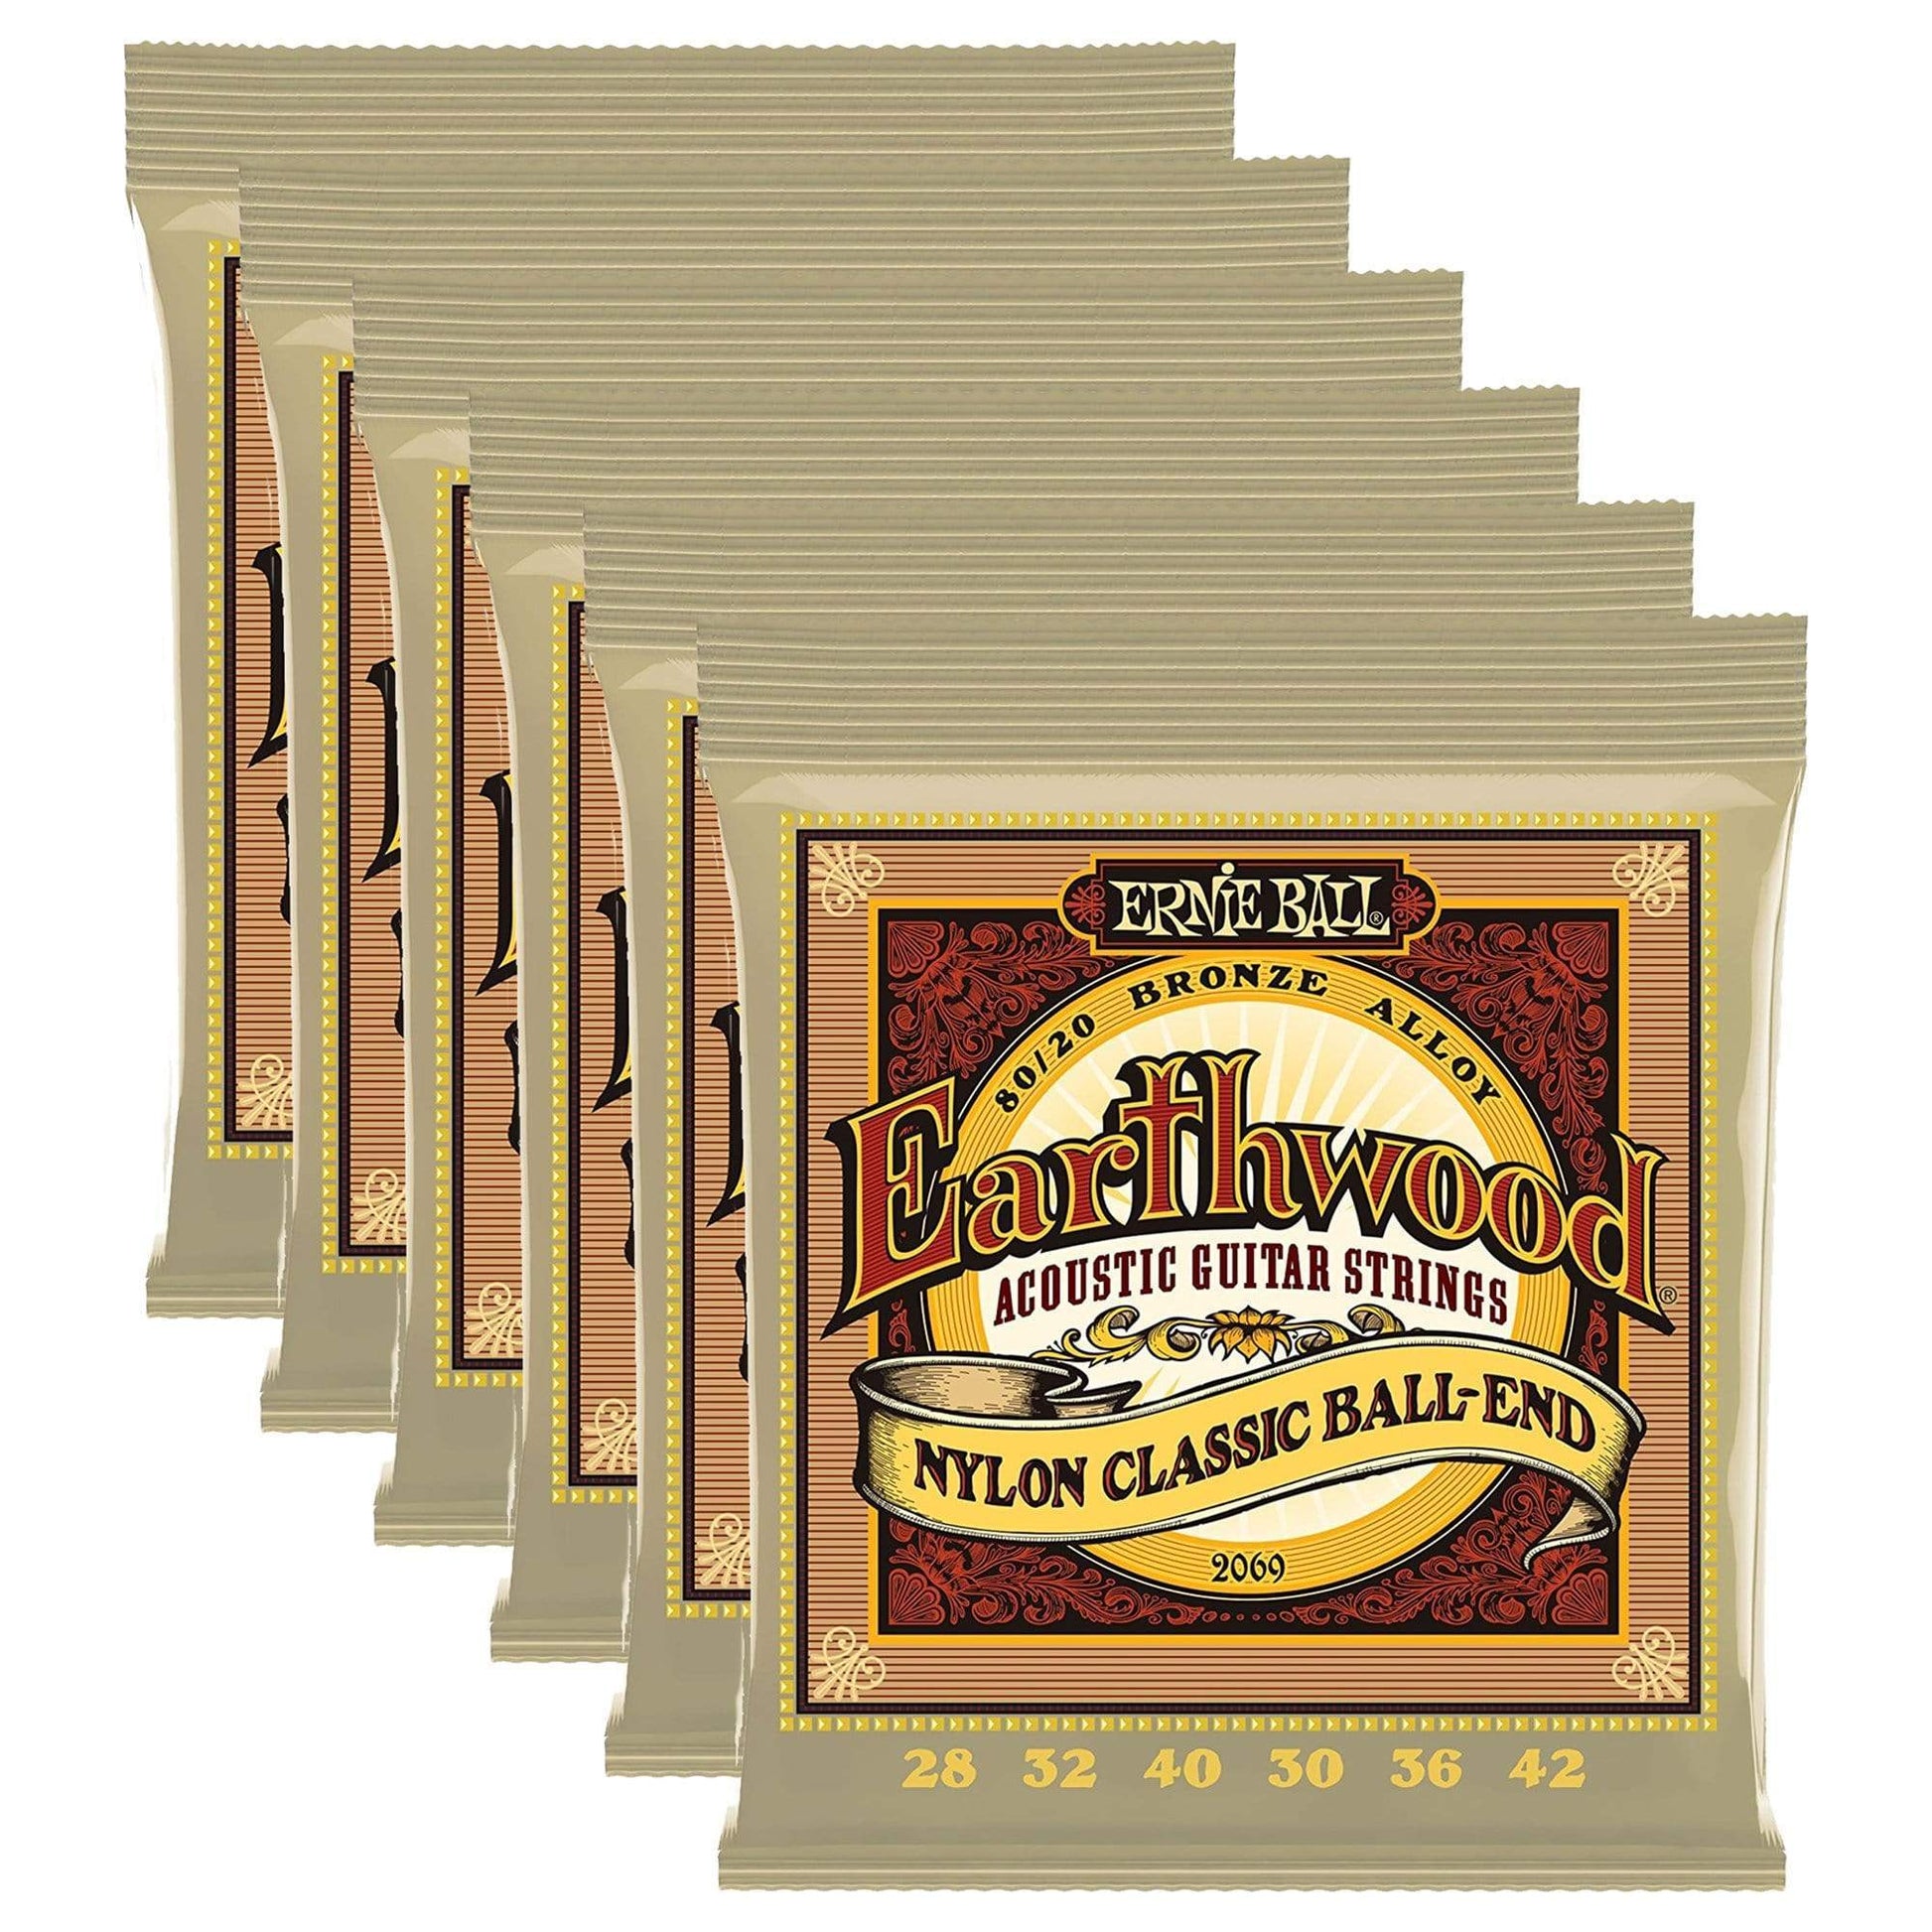 Ernie Ball 2069 Earthwood Folk Nylon Ball End Set, Clear and Gold (6 Pack Bundle) Accessories / Strings / Guitar Strings